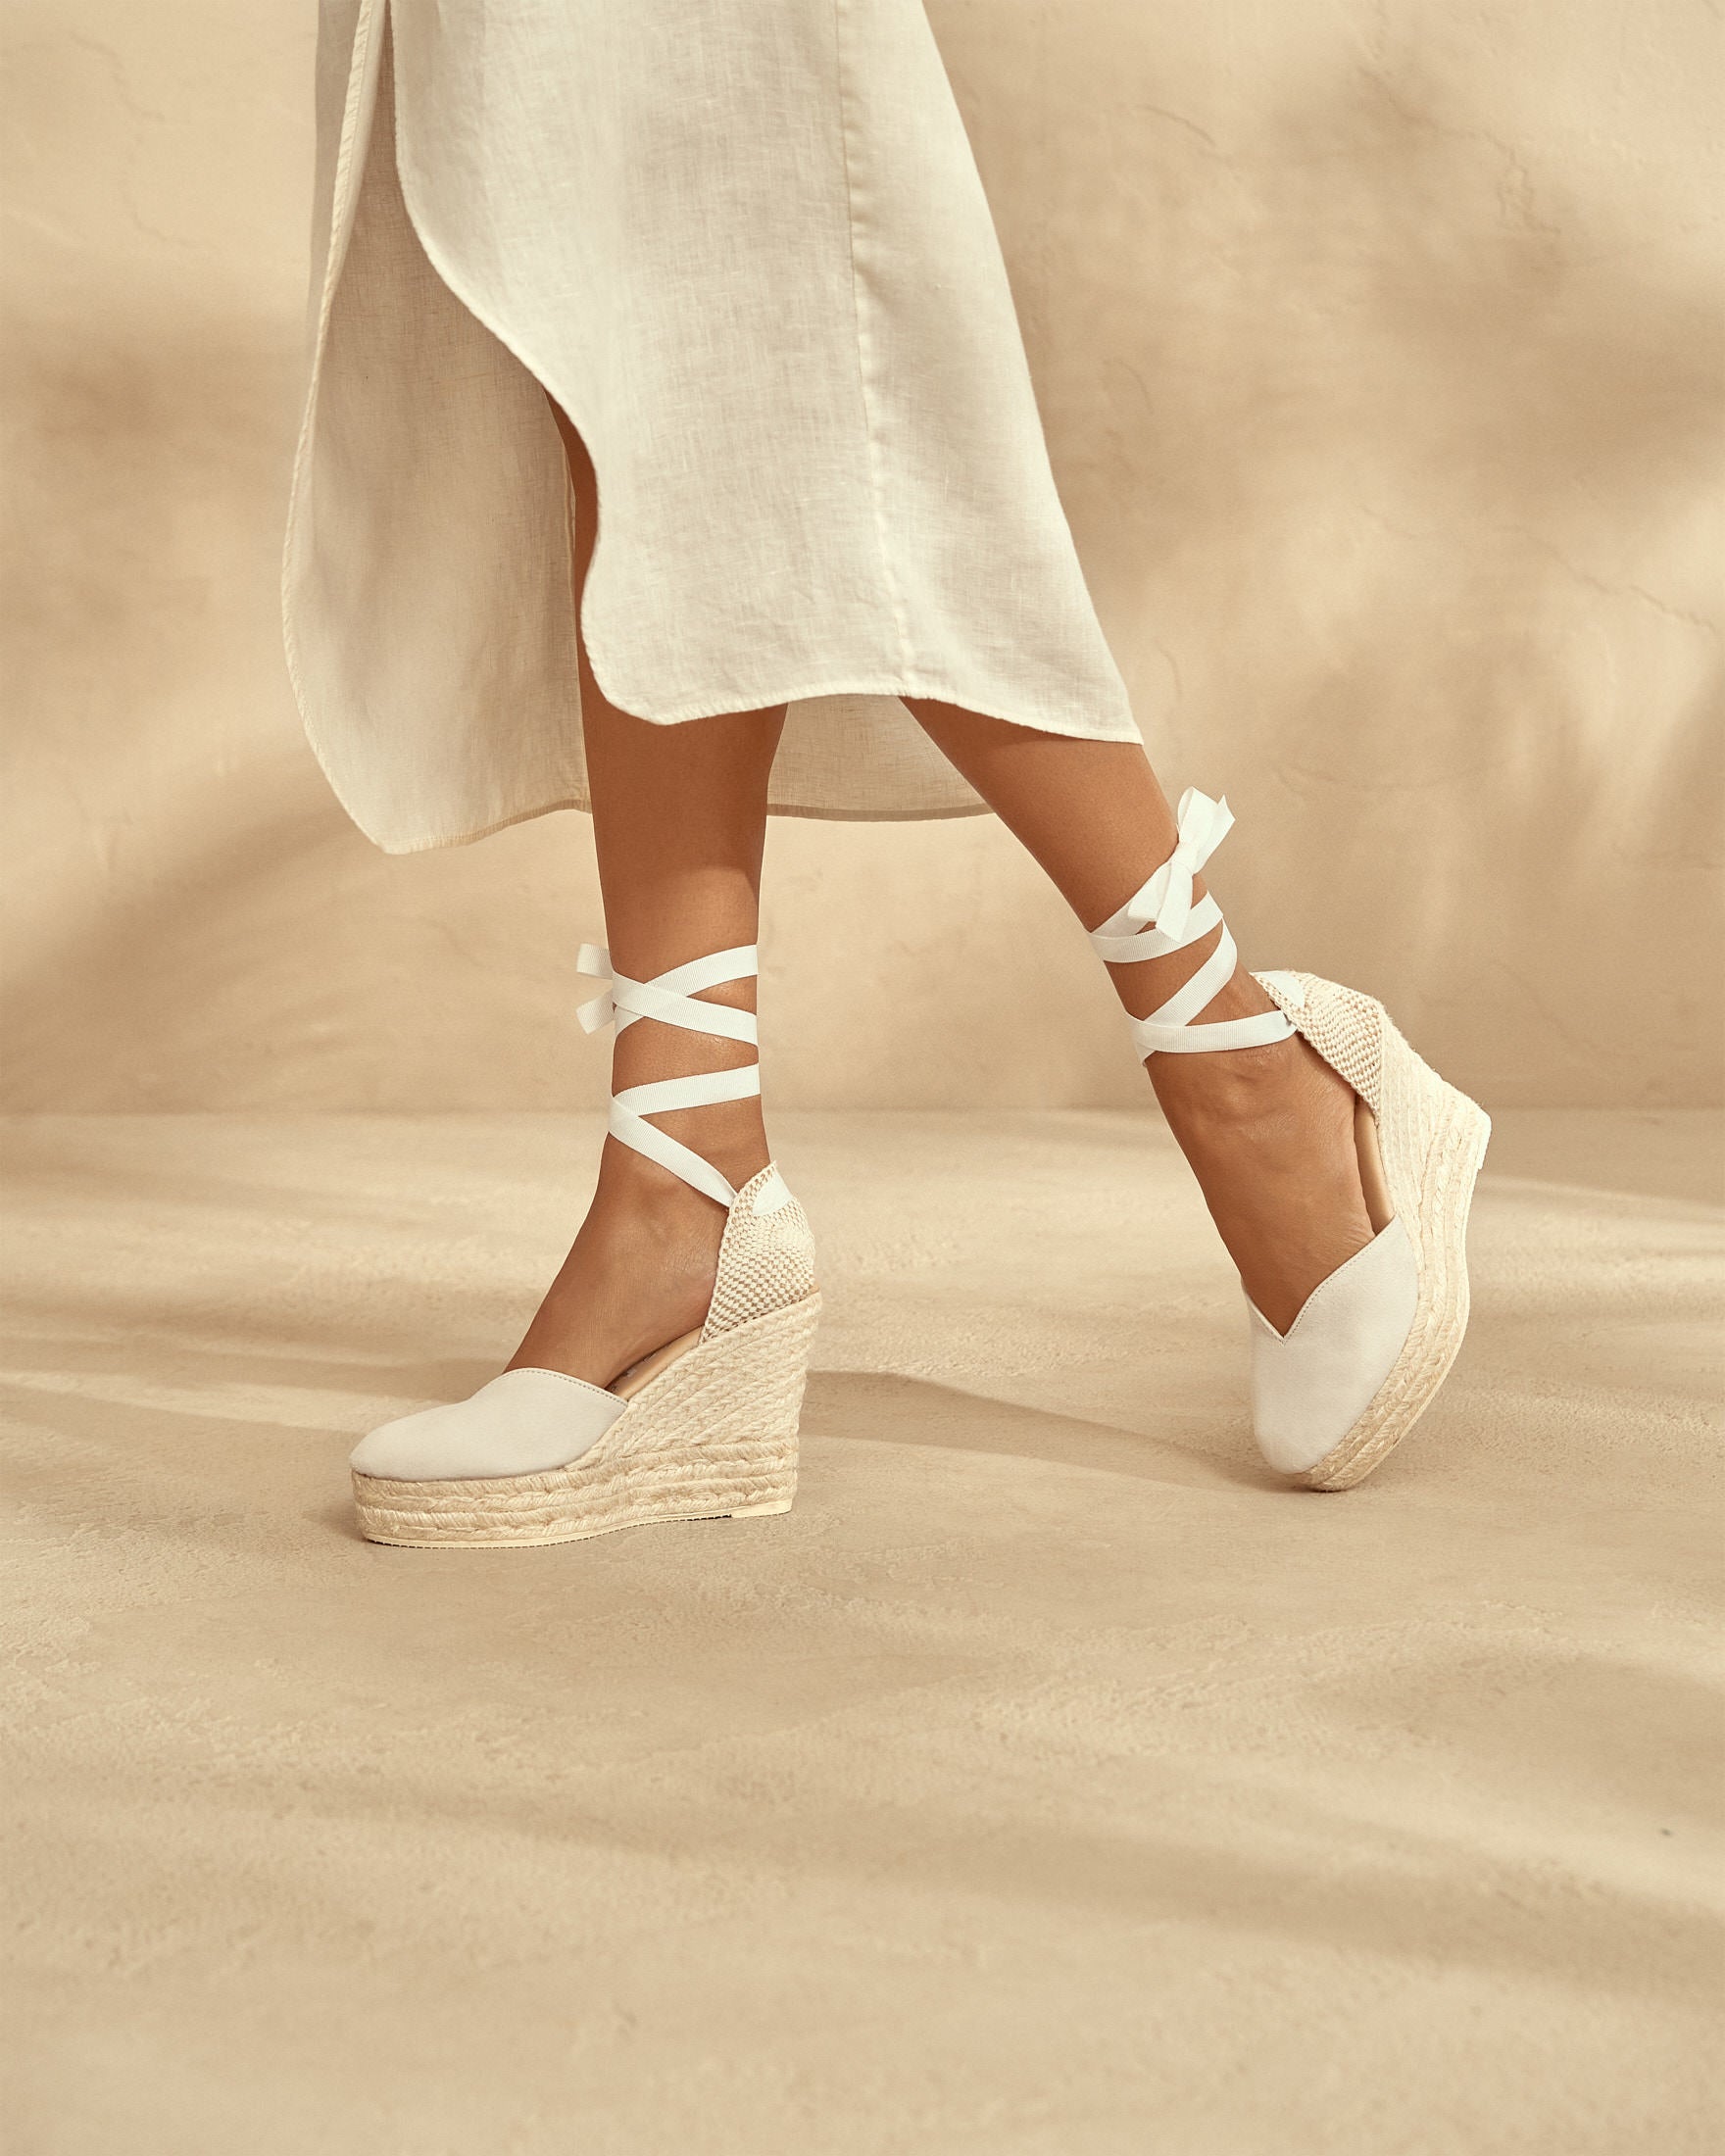 Heart-Shaped Wedges Sandals - White